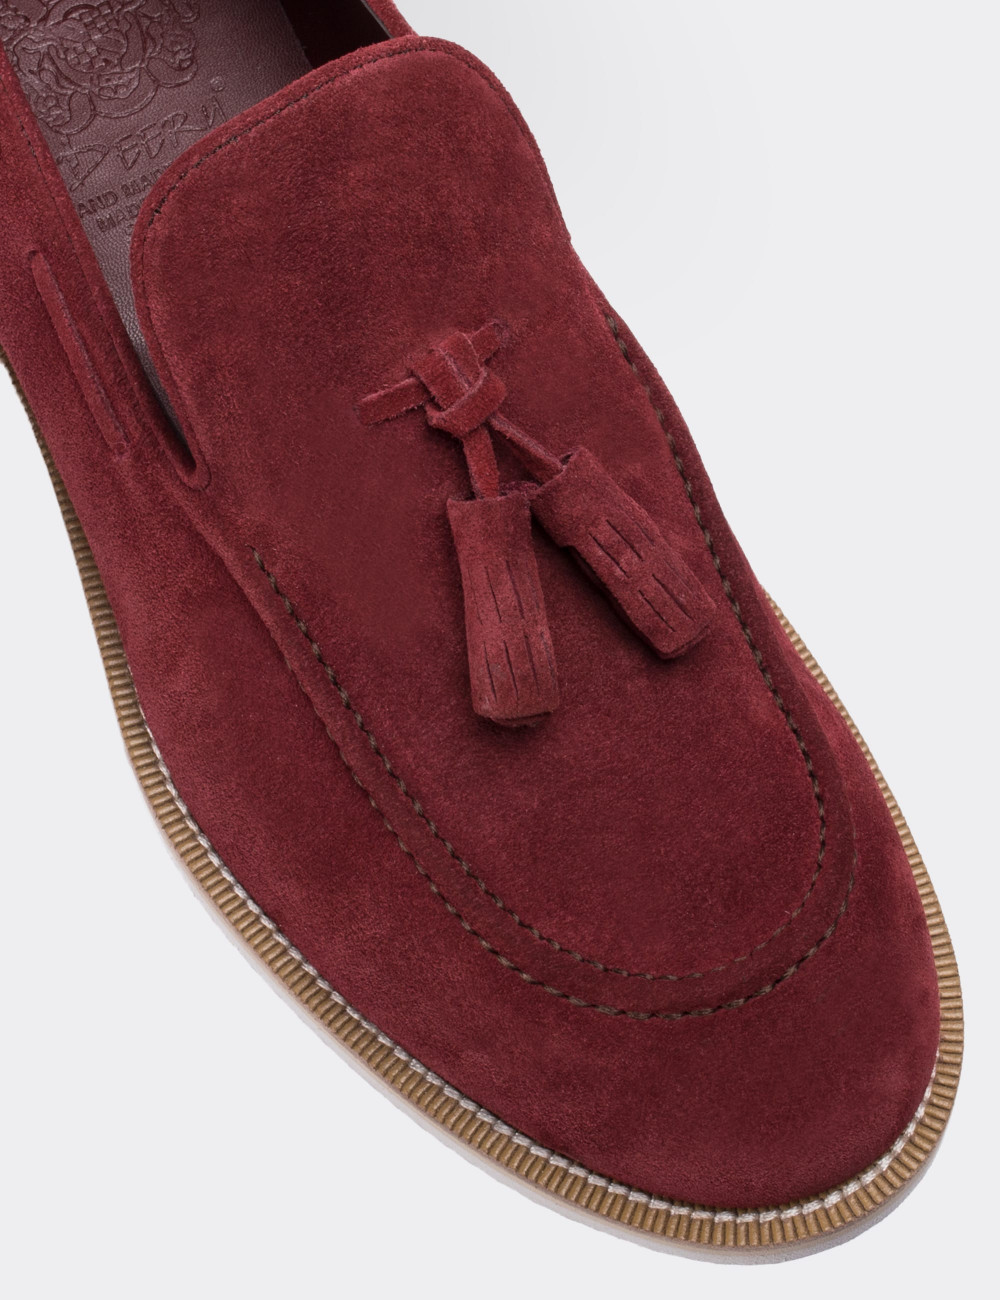 Burgundy Suede Leather Loafers - 01319MBRDE02